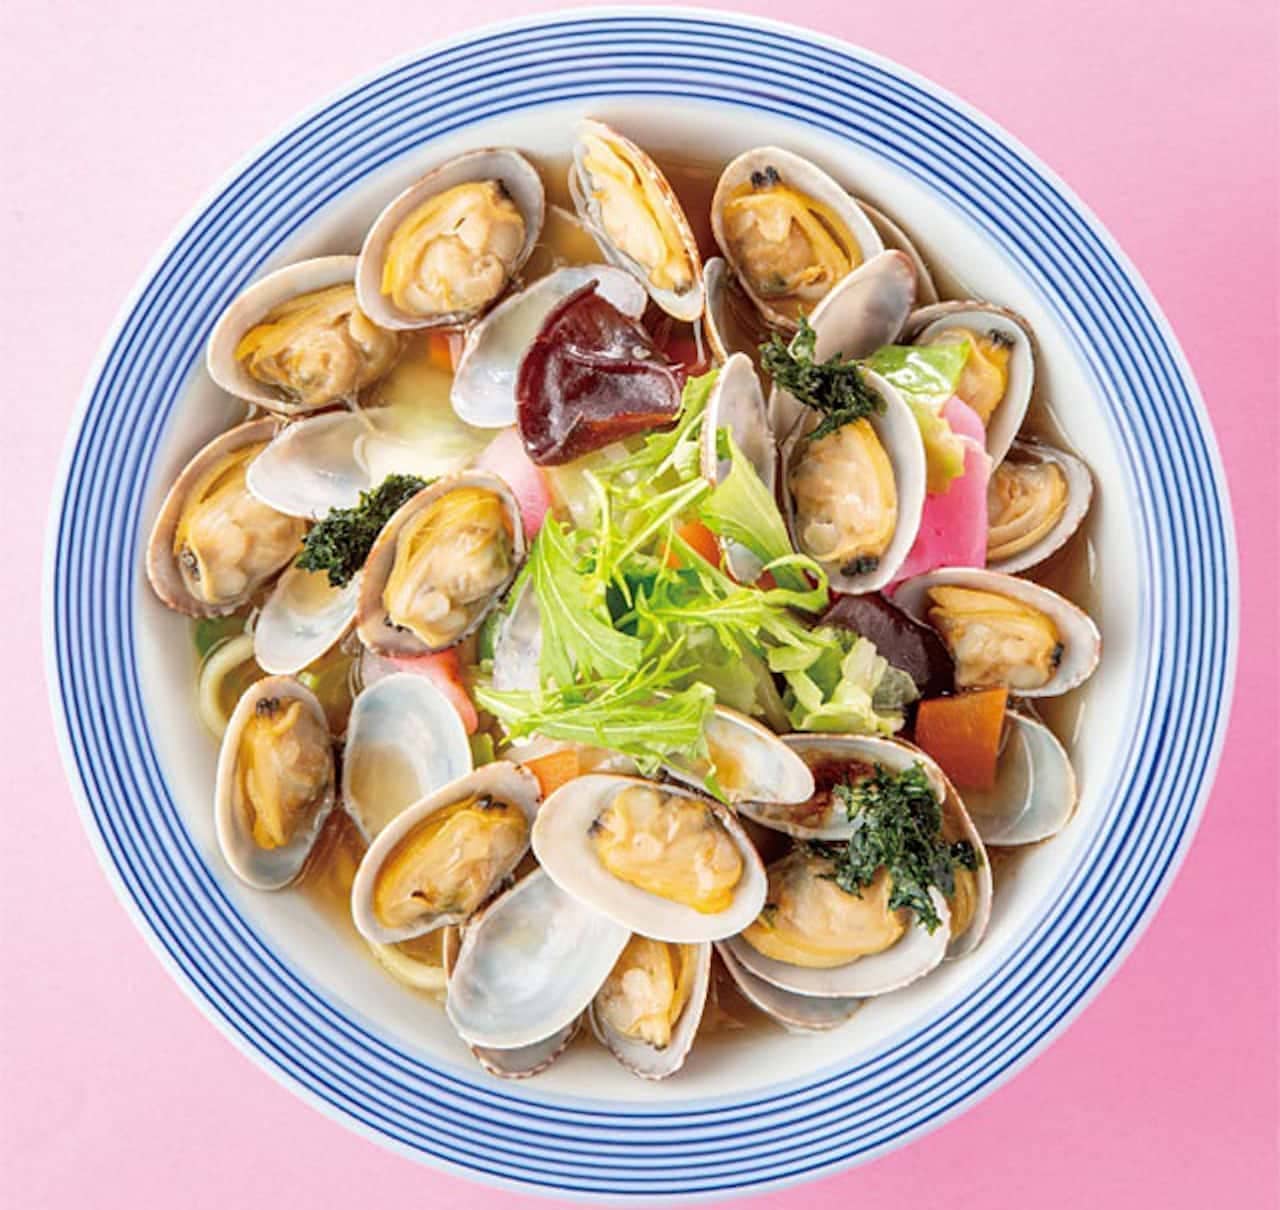 "Champon with plenty of clams" in Ringer Hut